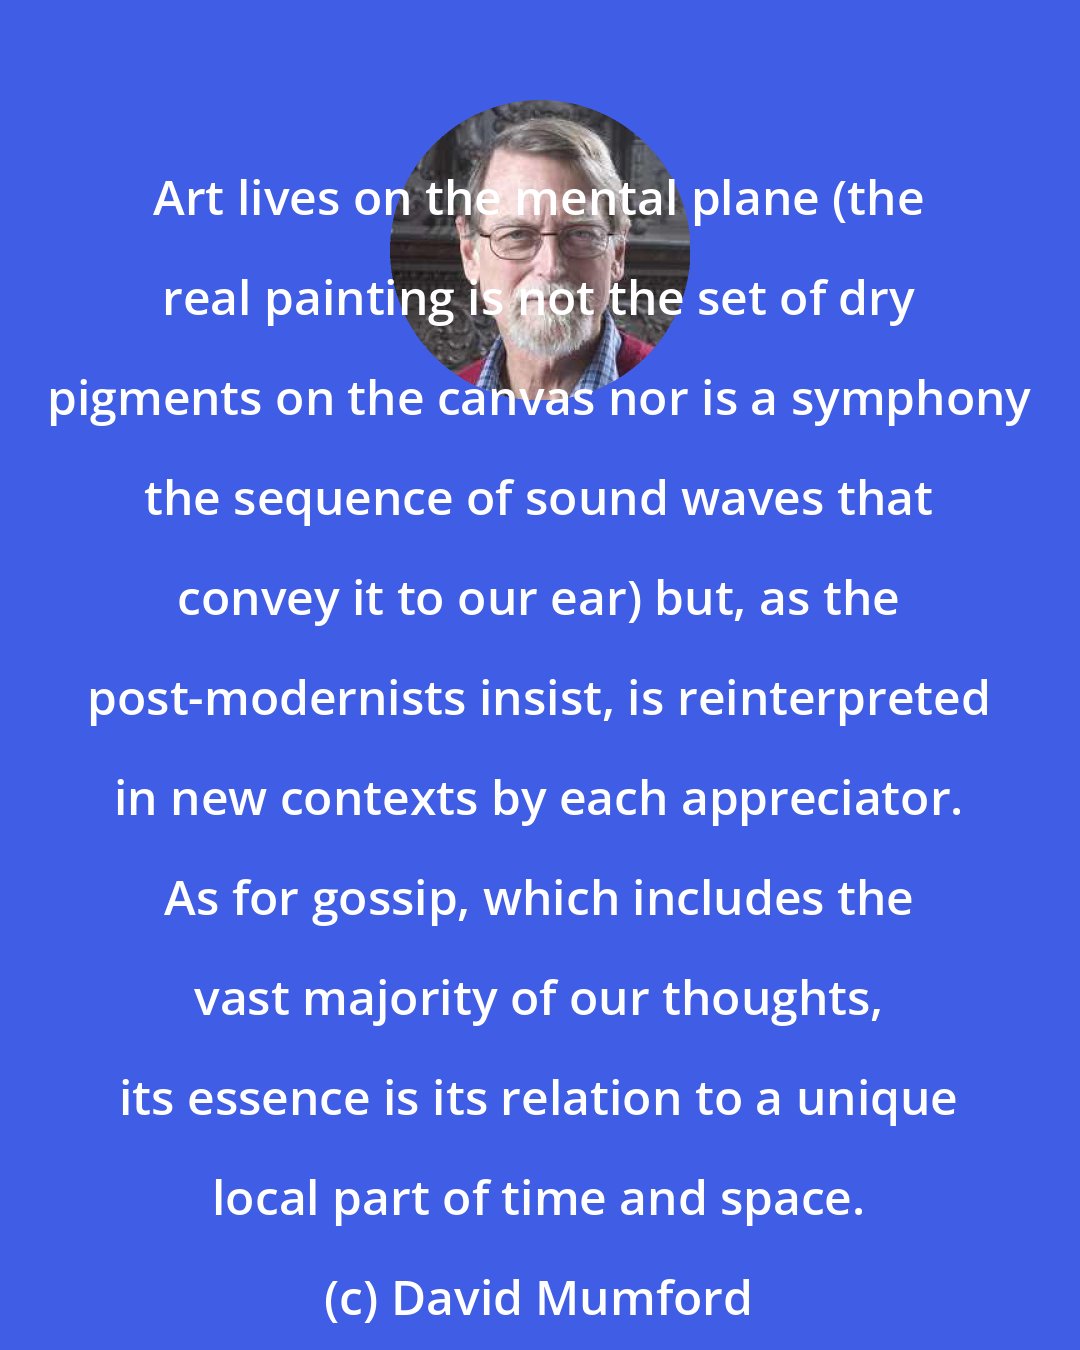 David Mumford: Art lives on the mental plane (the real painting is not the set of dry pigments on the canvas nor is a symphony the sequence of sound waves that convey it to our ear) but, as the post-modernists insist, is reinterpreted in new contexts by each appreciator. As for gossip, which includes the vast majority of our thoughts, its essence is its relation to a unique local part of time and space.